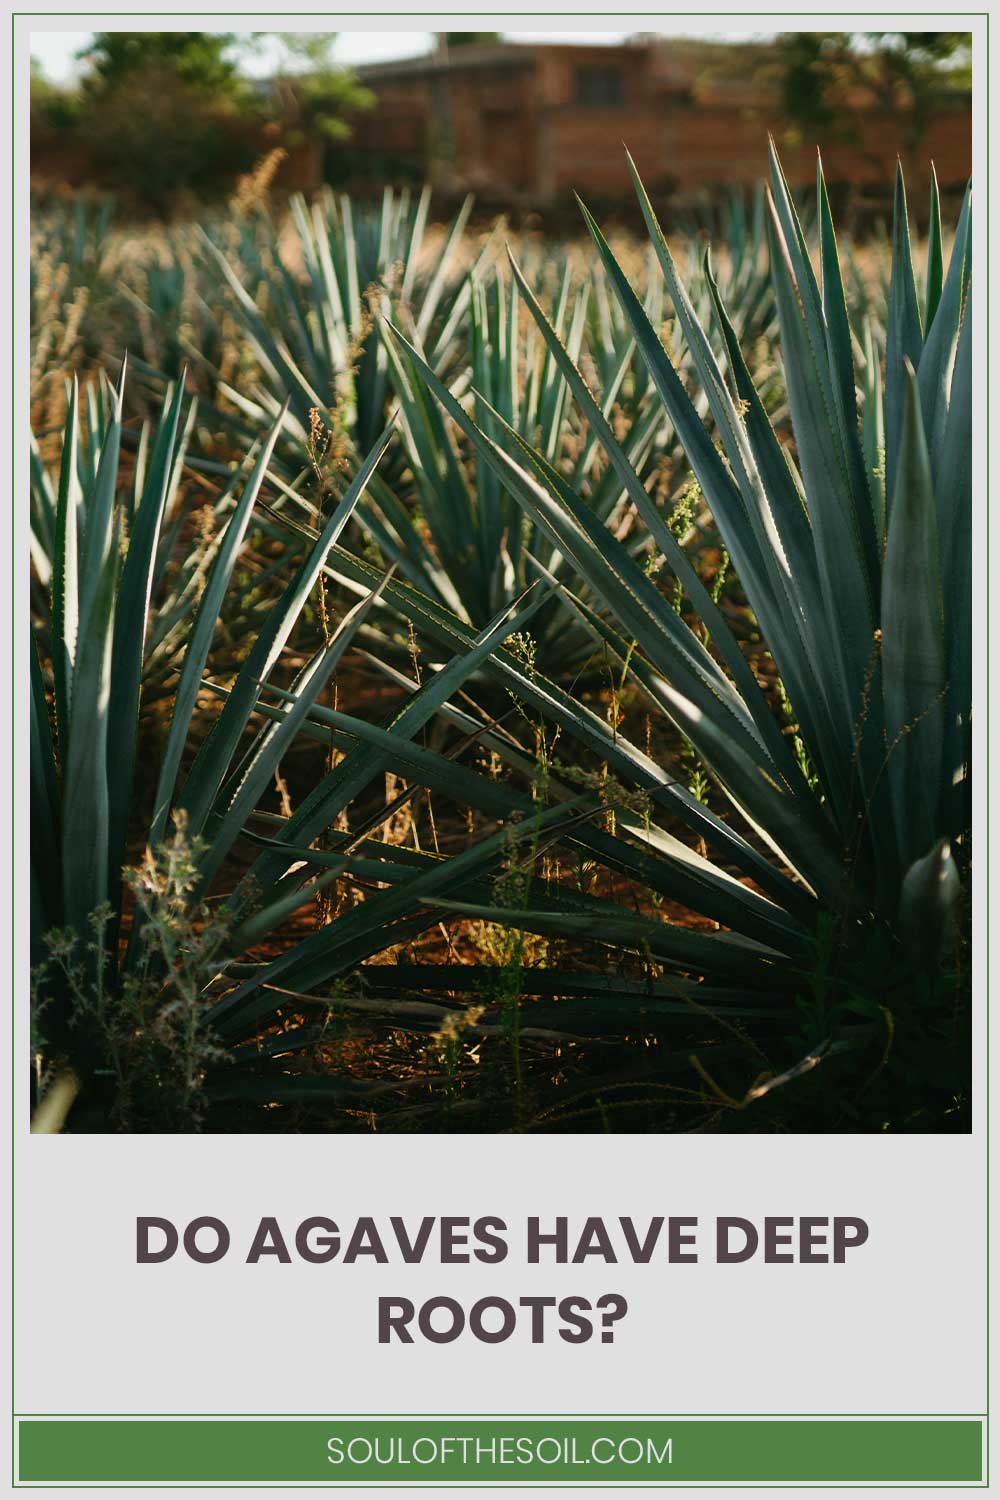 Some Agave plants - do they have deep roots?